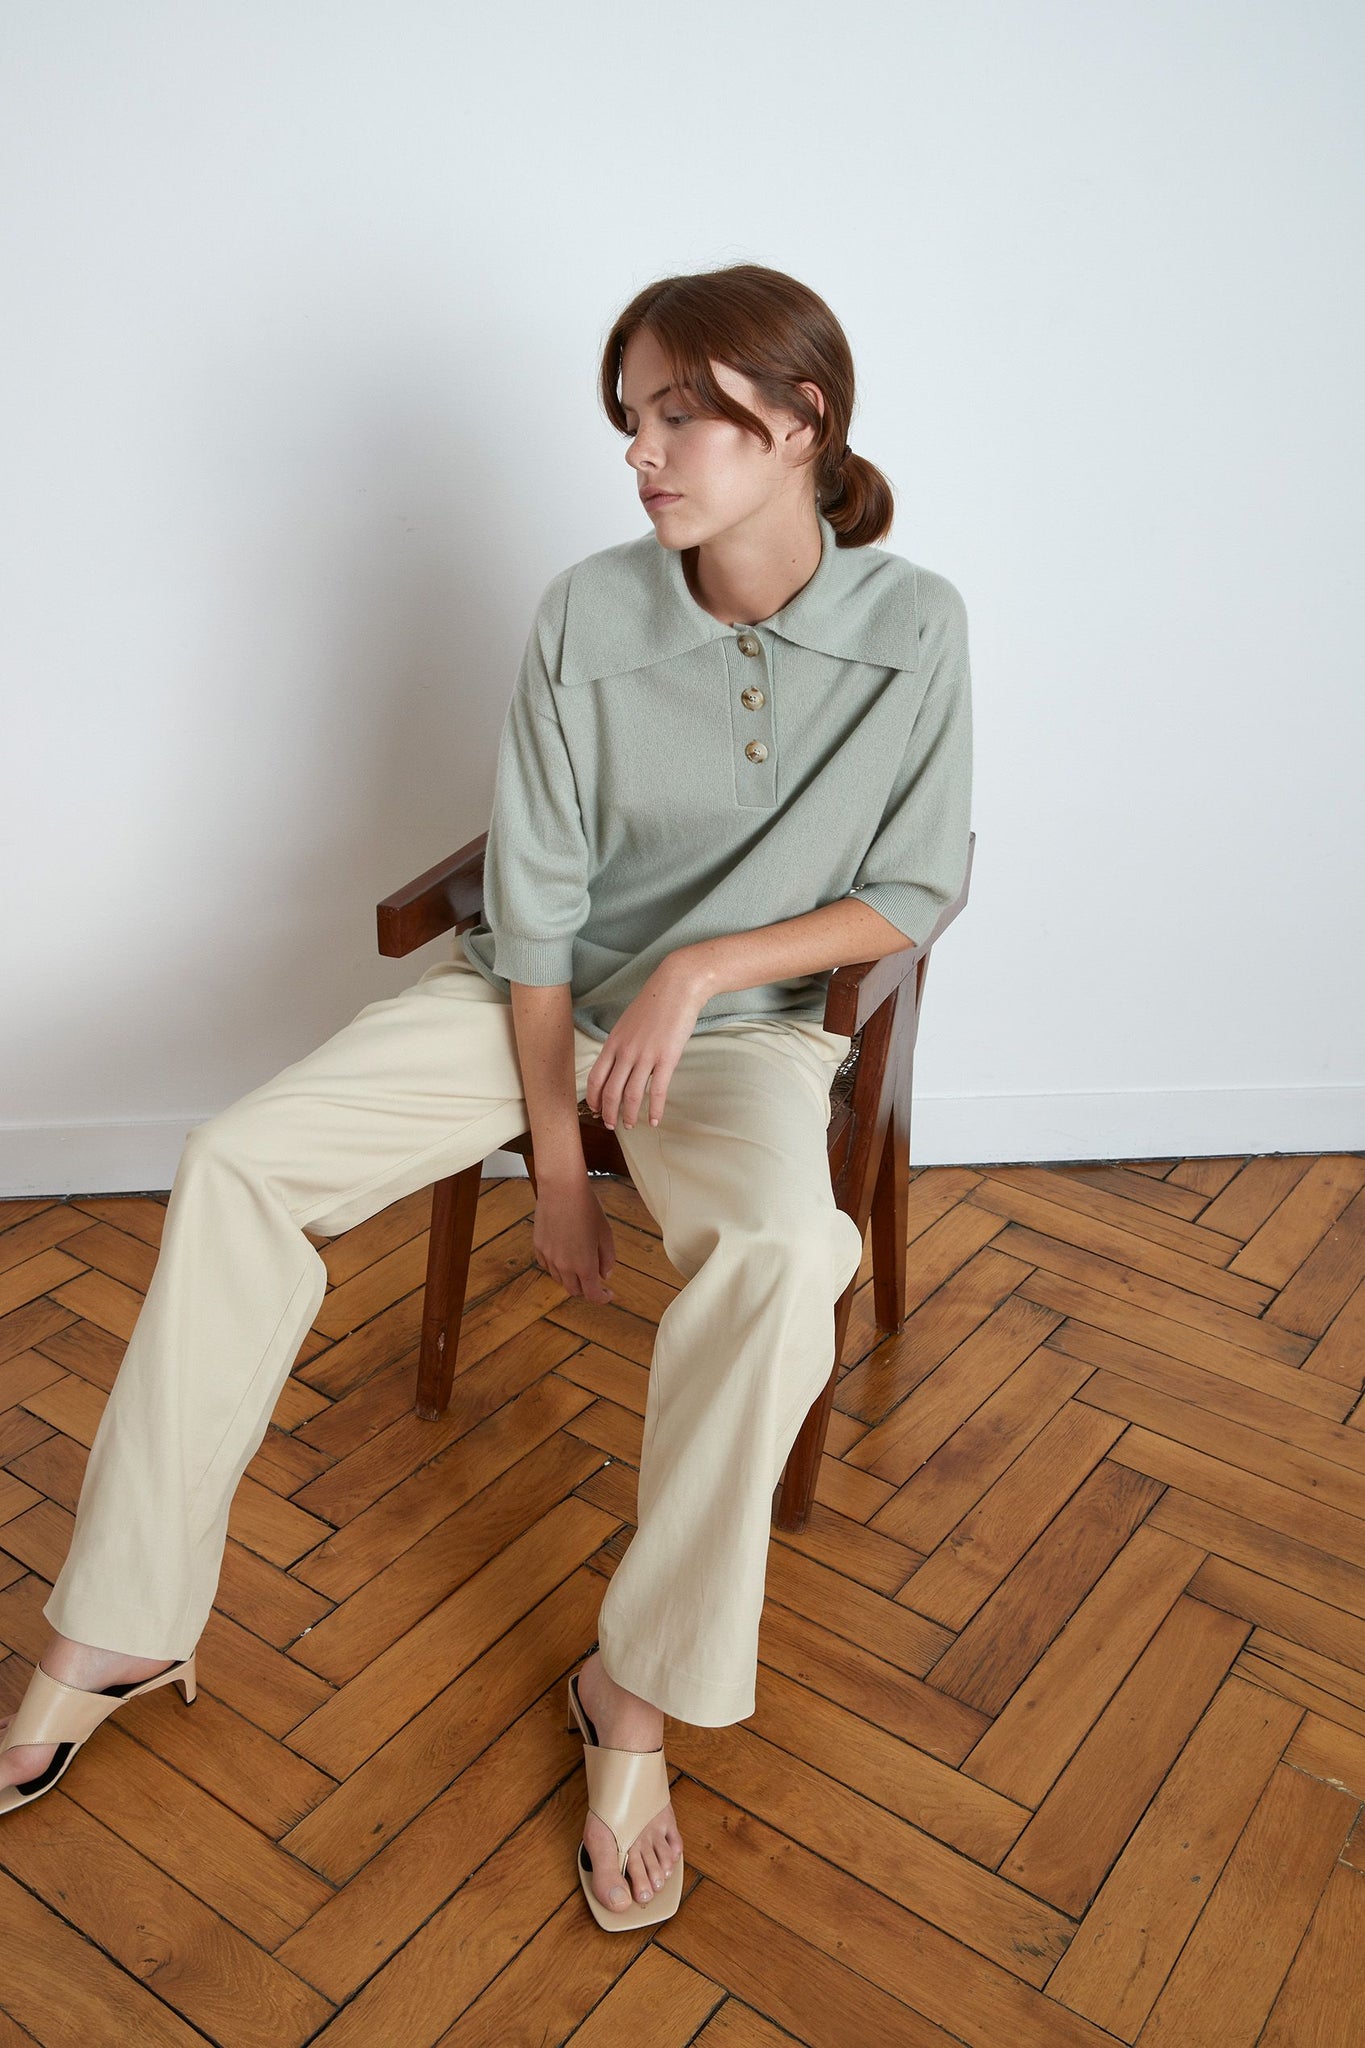 SAZILEY CASHMERE POLO BY LOULOU STUDIO IN ALMOND